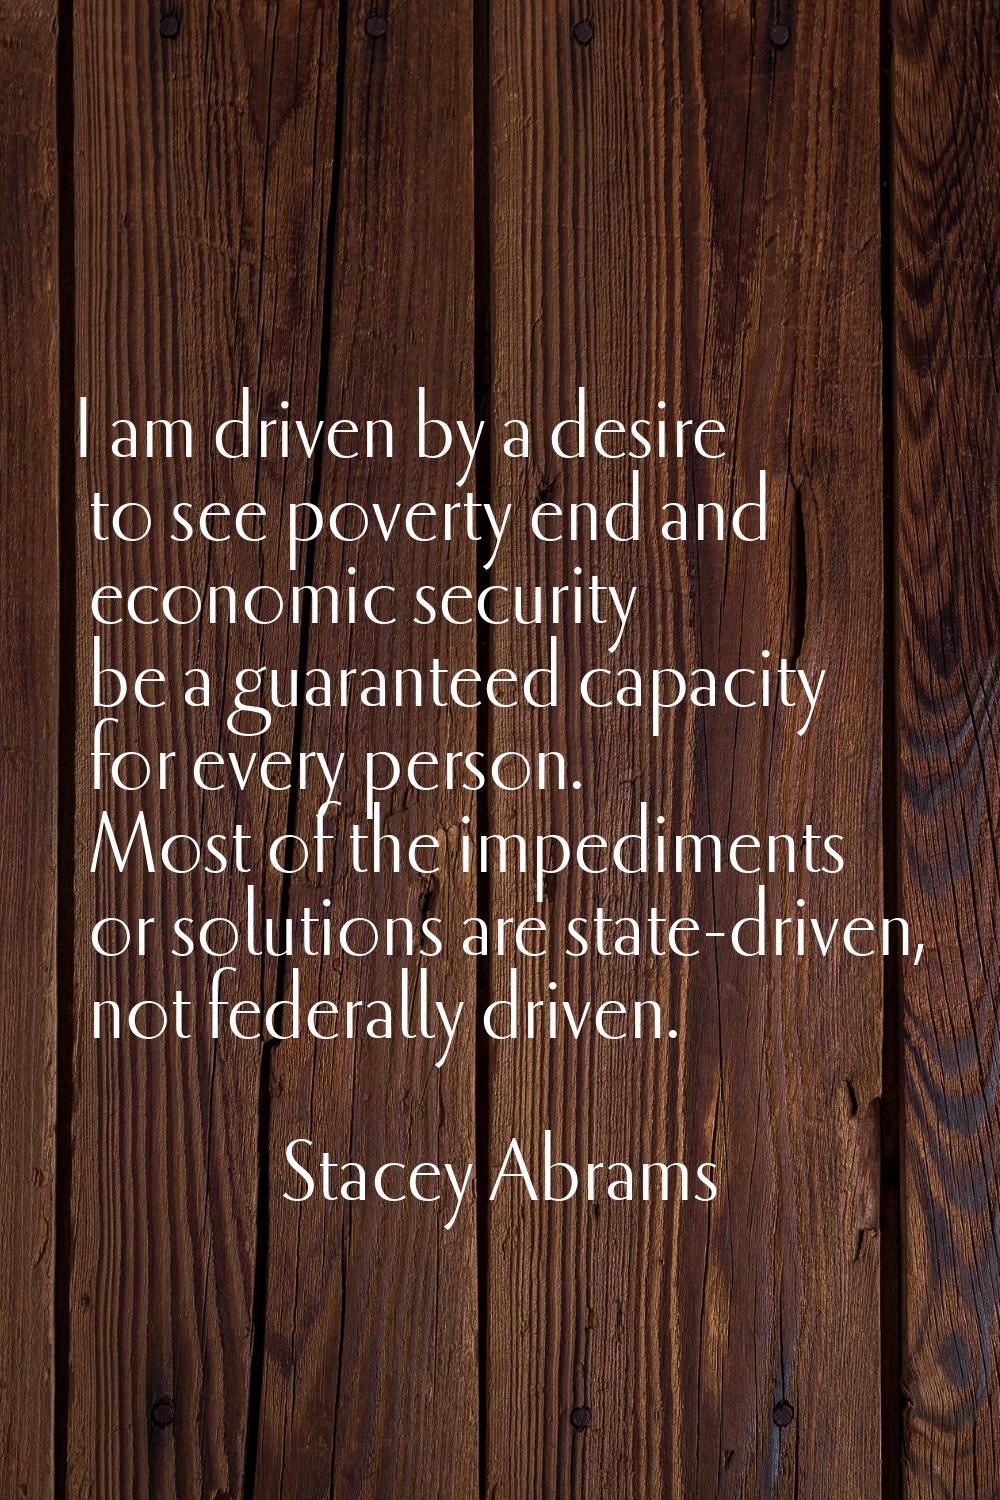 I am driven by a desire to see poverty end and economic security be a guaranteed capacity for every